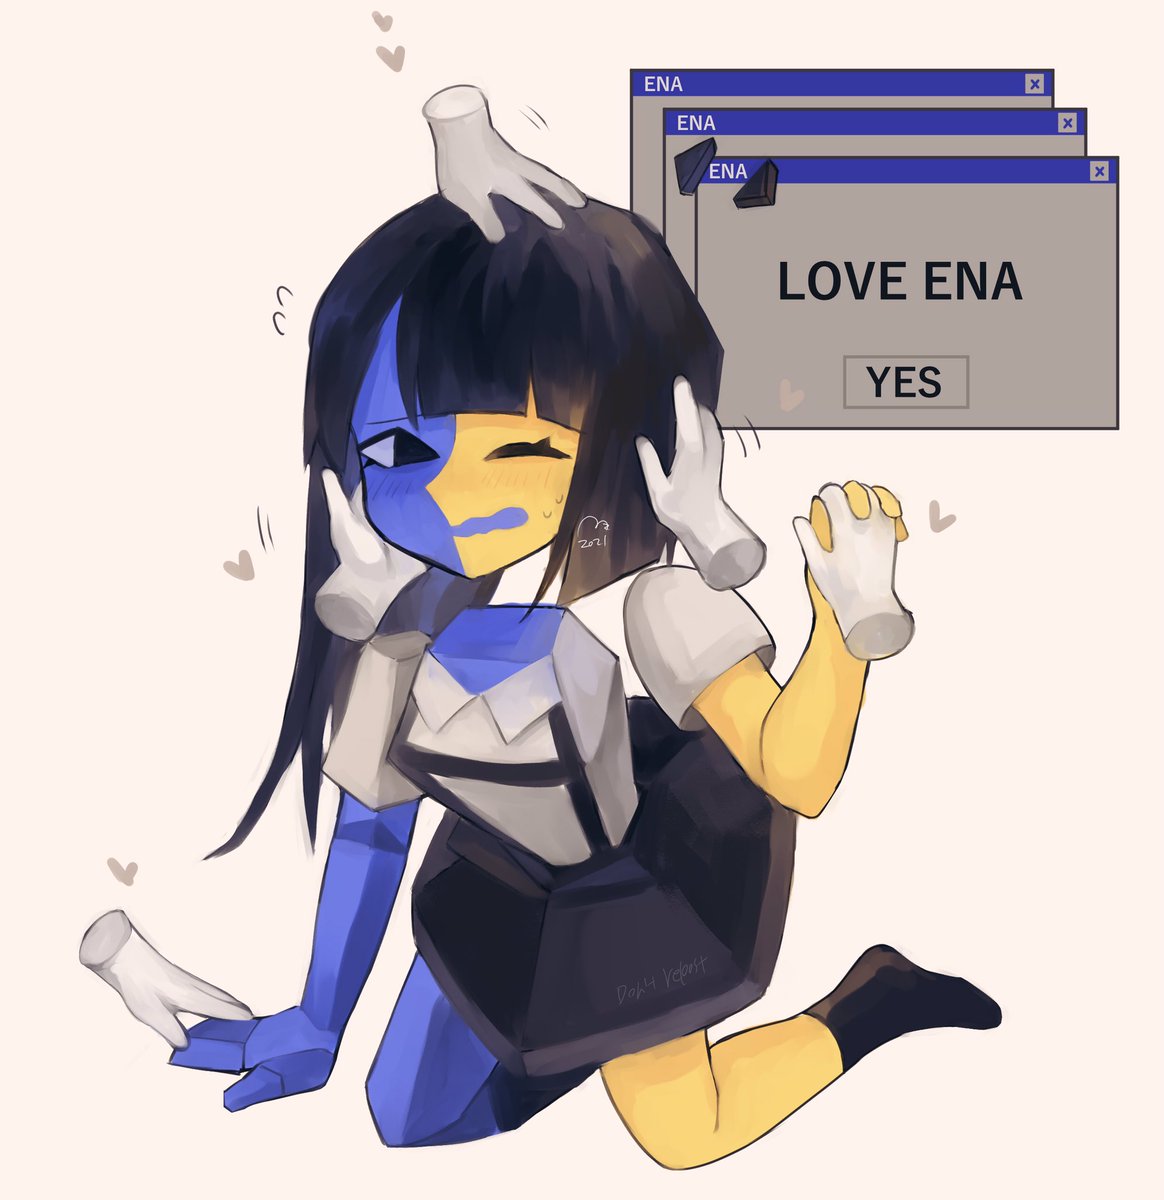 「I didn't have enough hands to love ENA…�」|✕̤͓̽ゾ̤͓̽mezoのイラスト